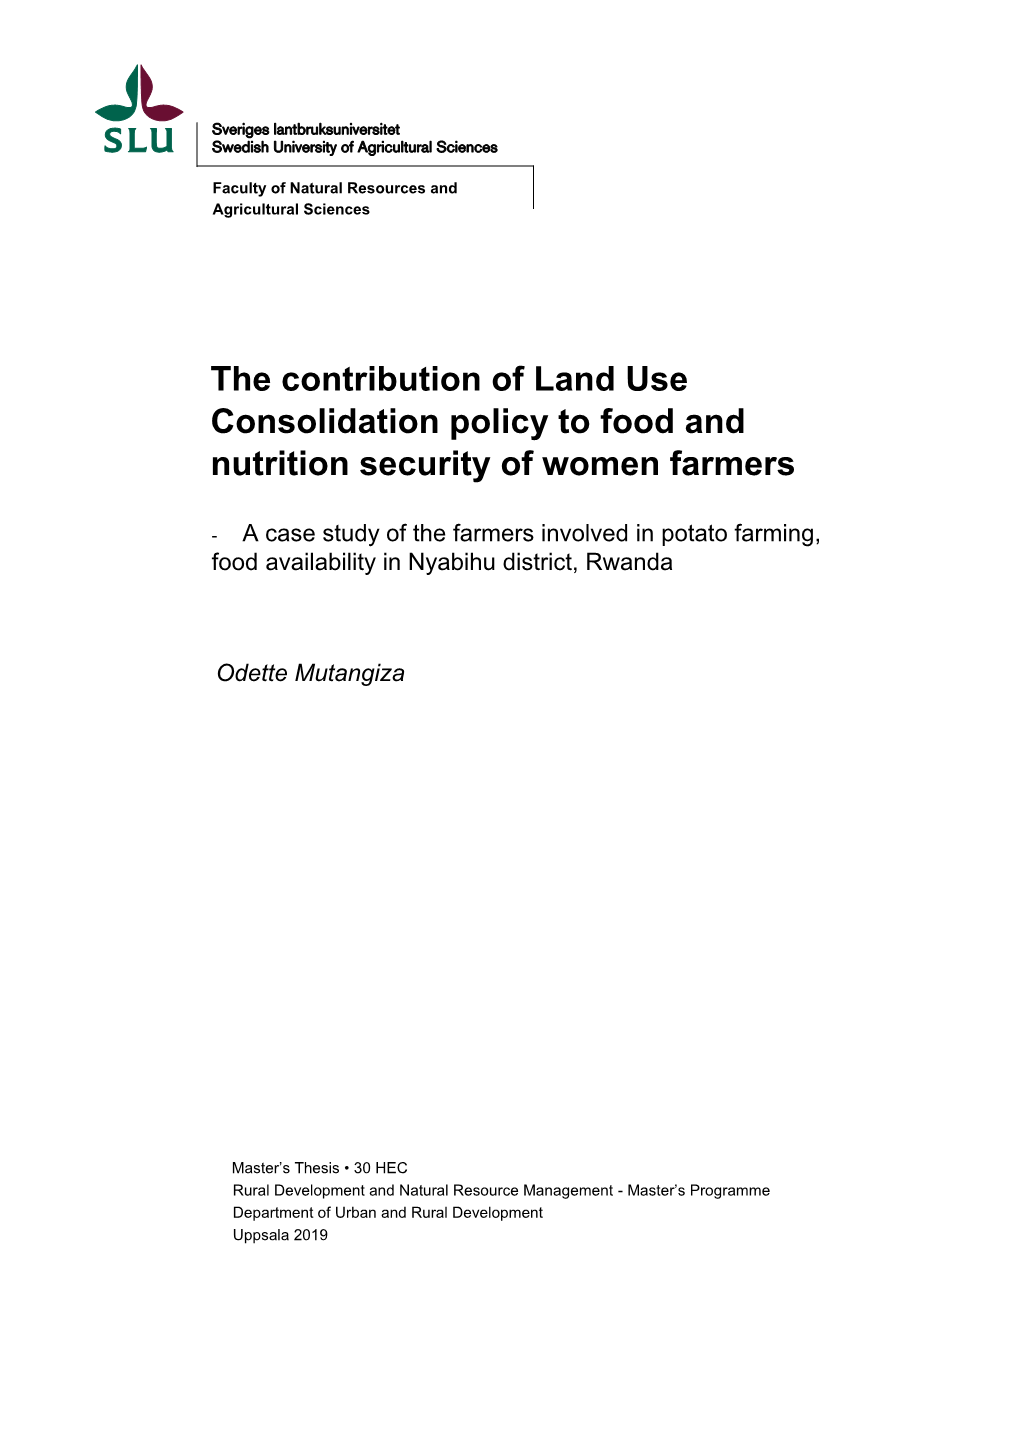 The Contribution of Land Use Consolidation Policy to Food and Nutrition Security of Women Farmers